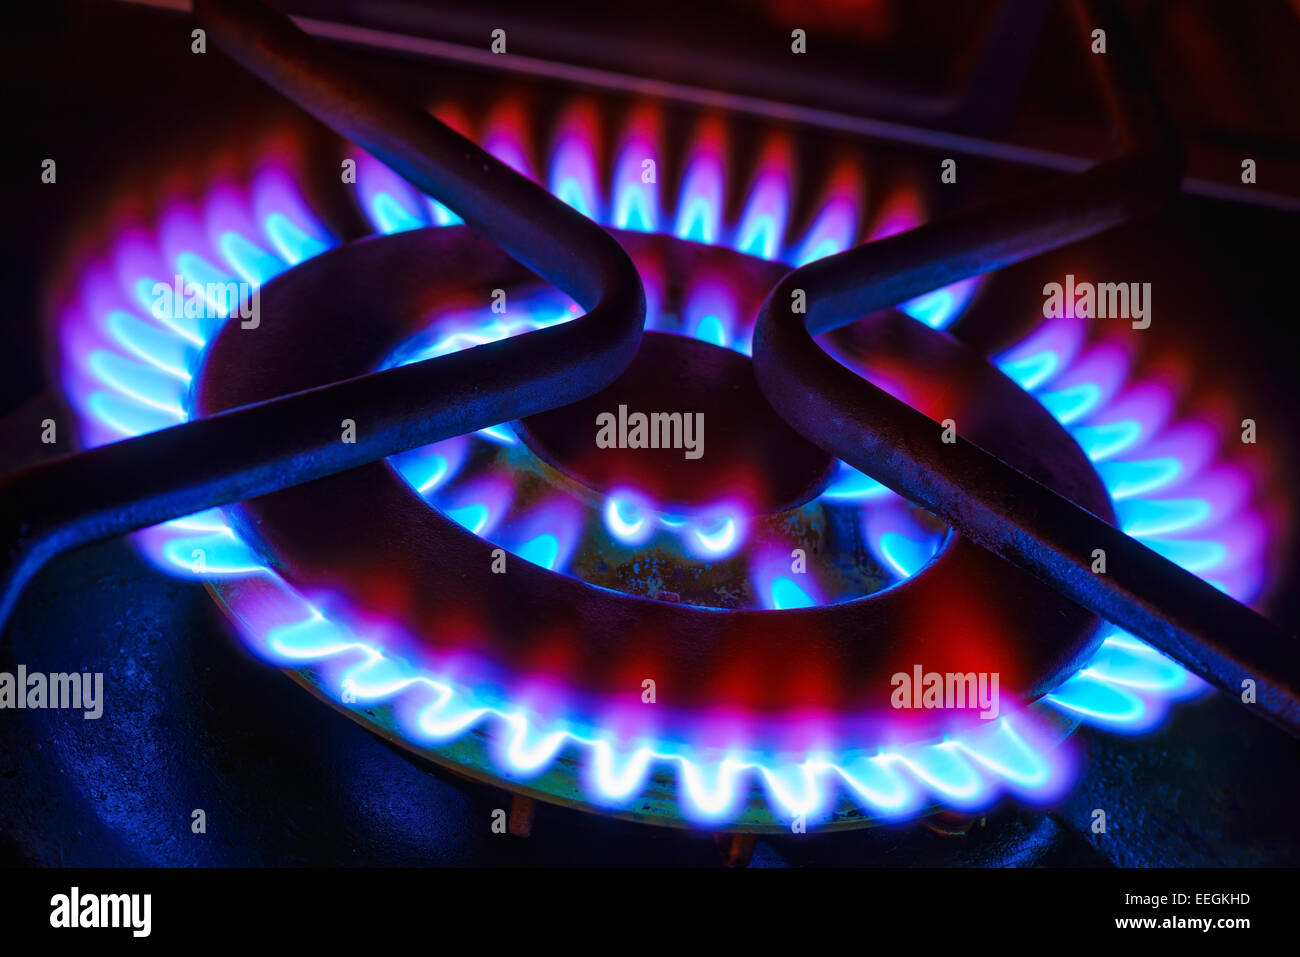 A gas wok burner with blue and red flames. Stock Photo